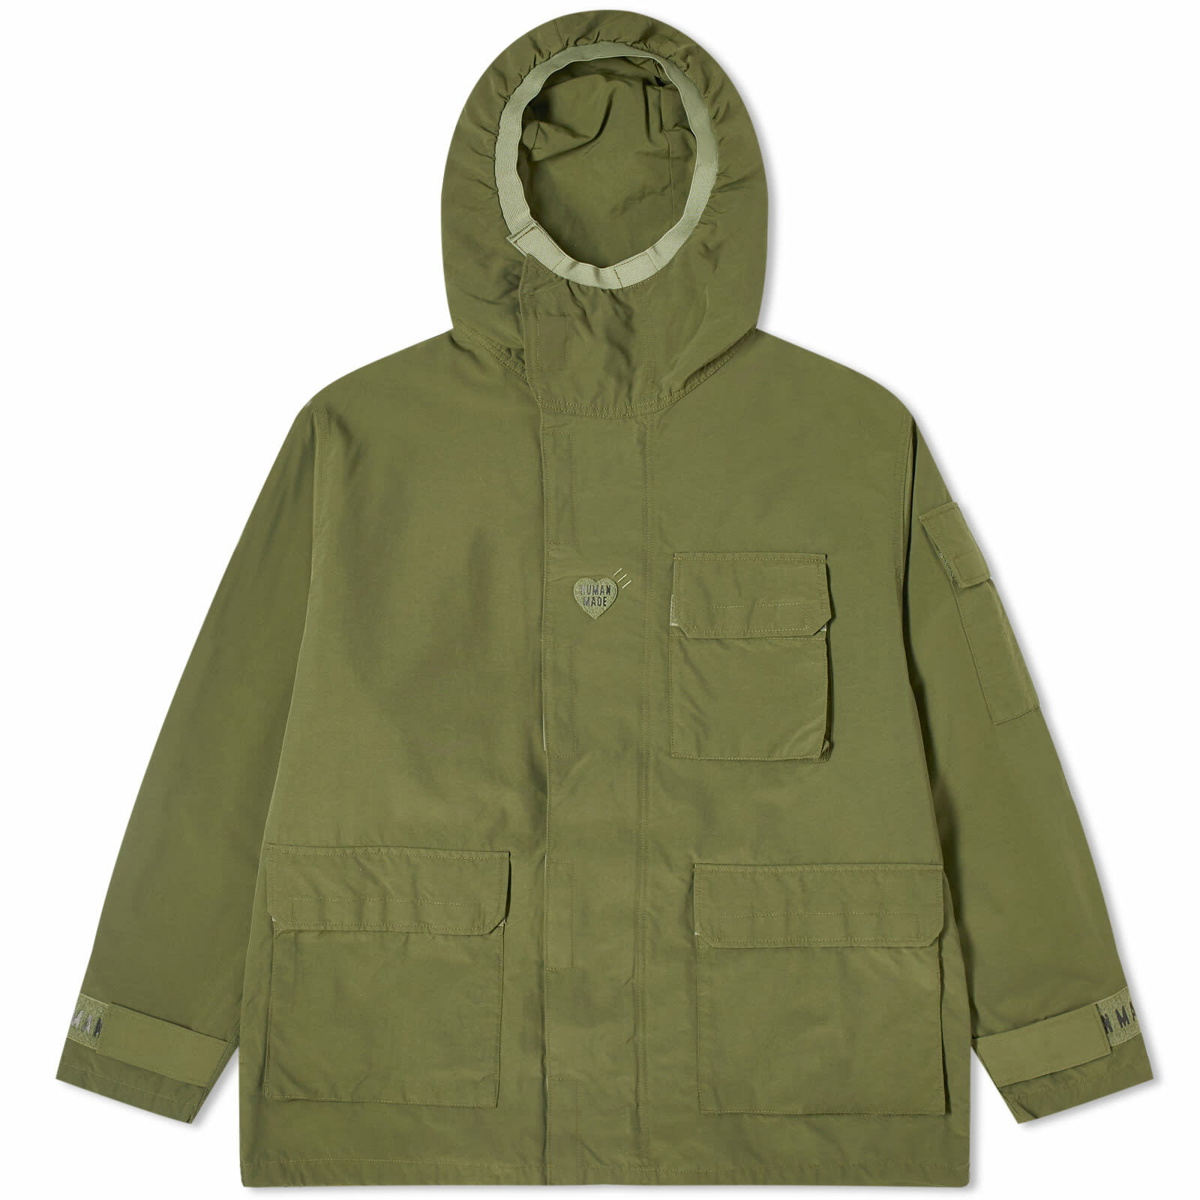 Human Made Men's Anorak Parka Jacket in Olive Drab Human Made